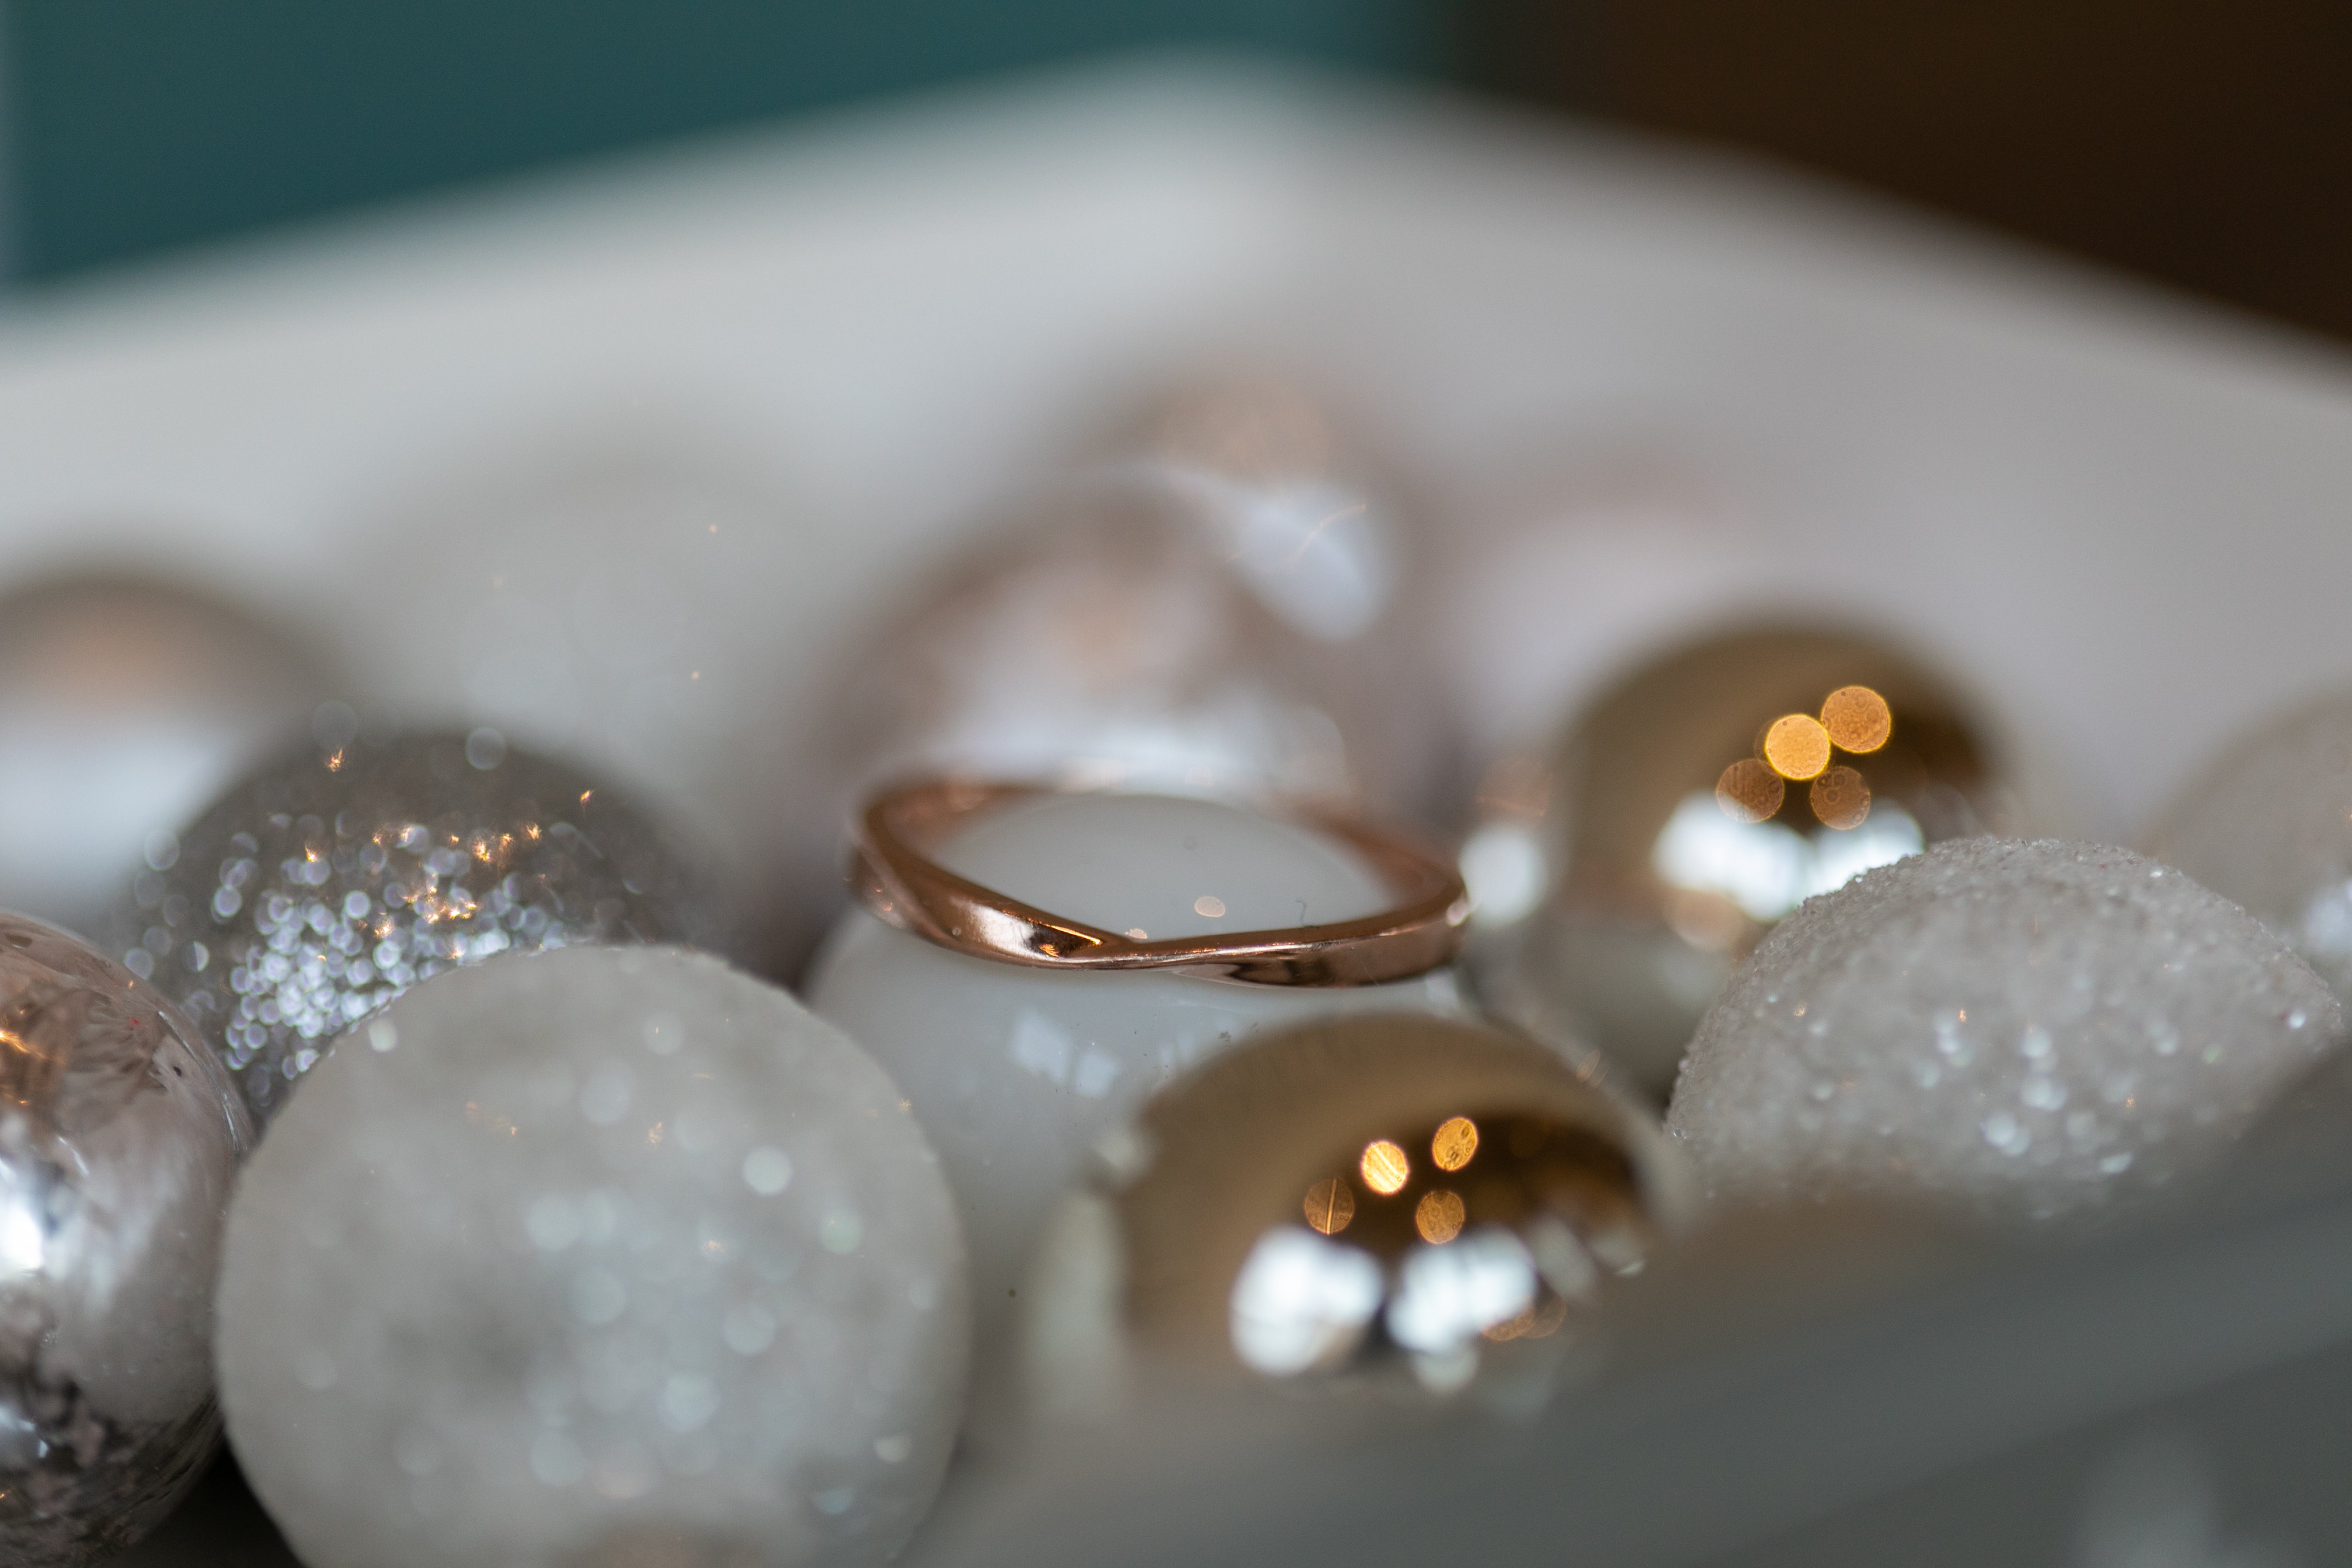 a rose gold twist ring sits atop a white Christmas ornament, nestled among other ornaments in silver and white.